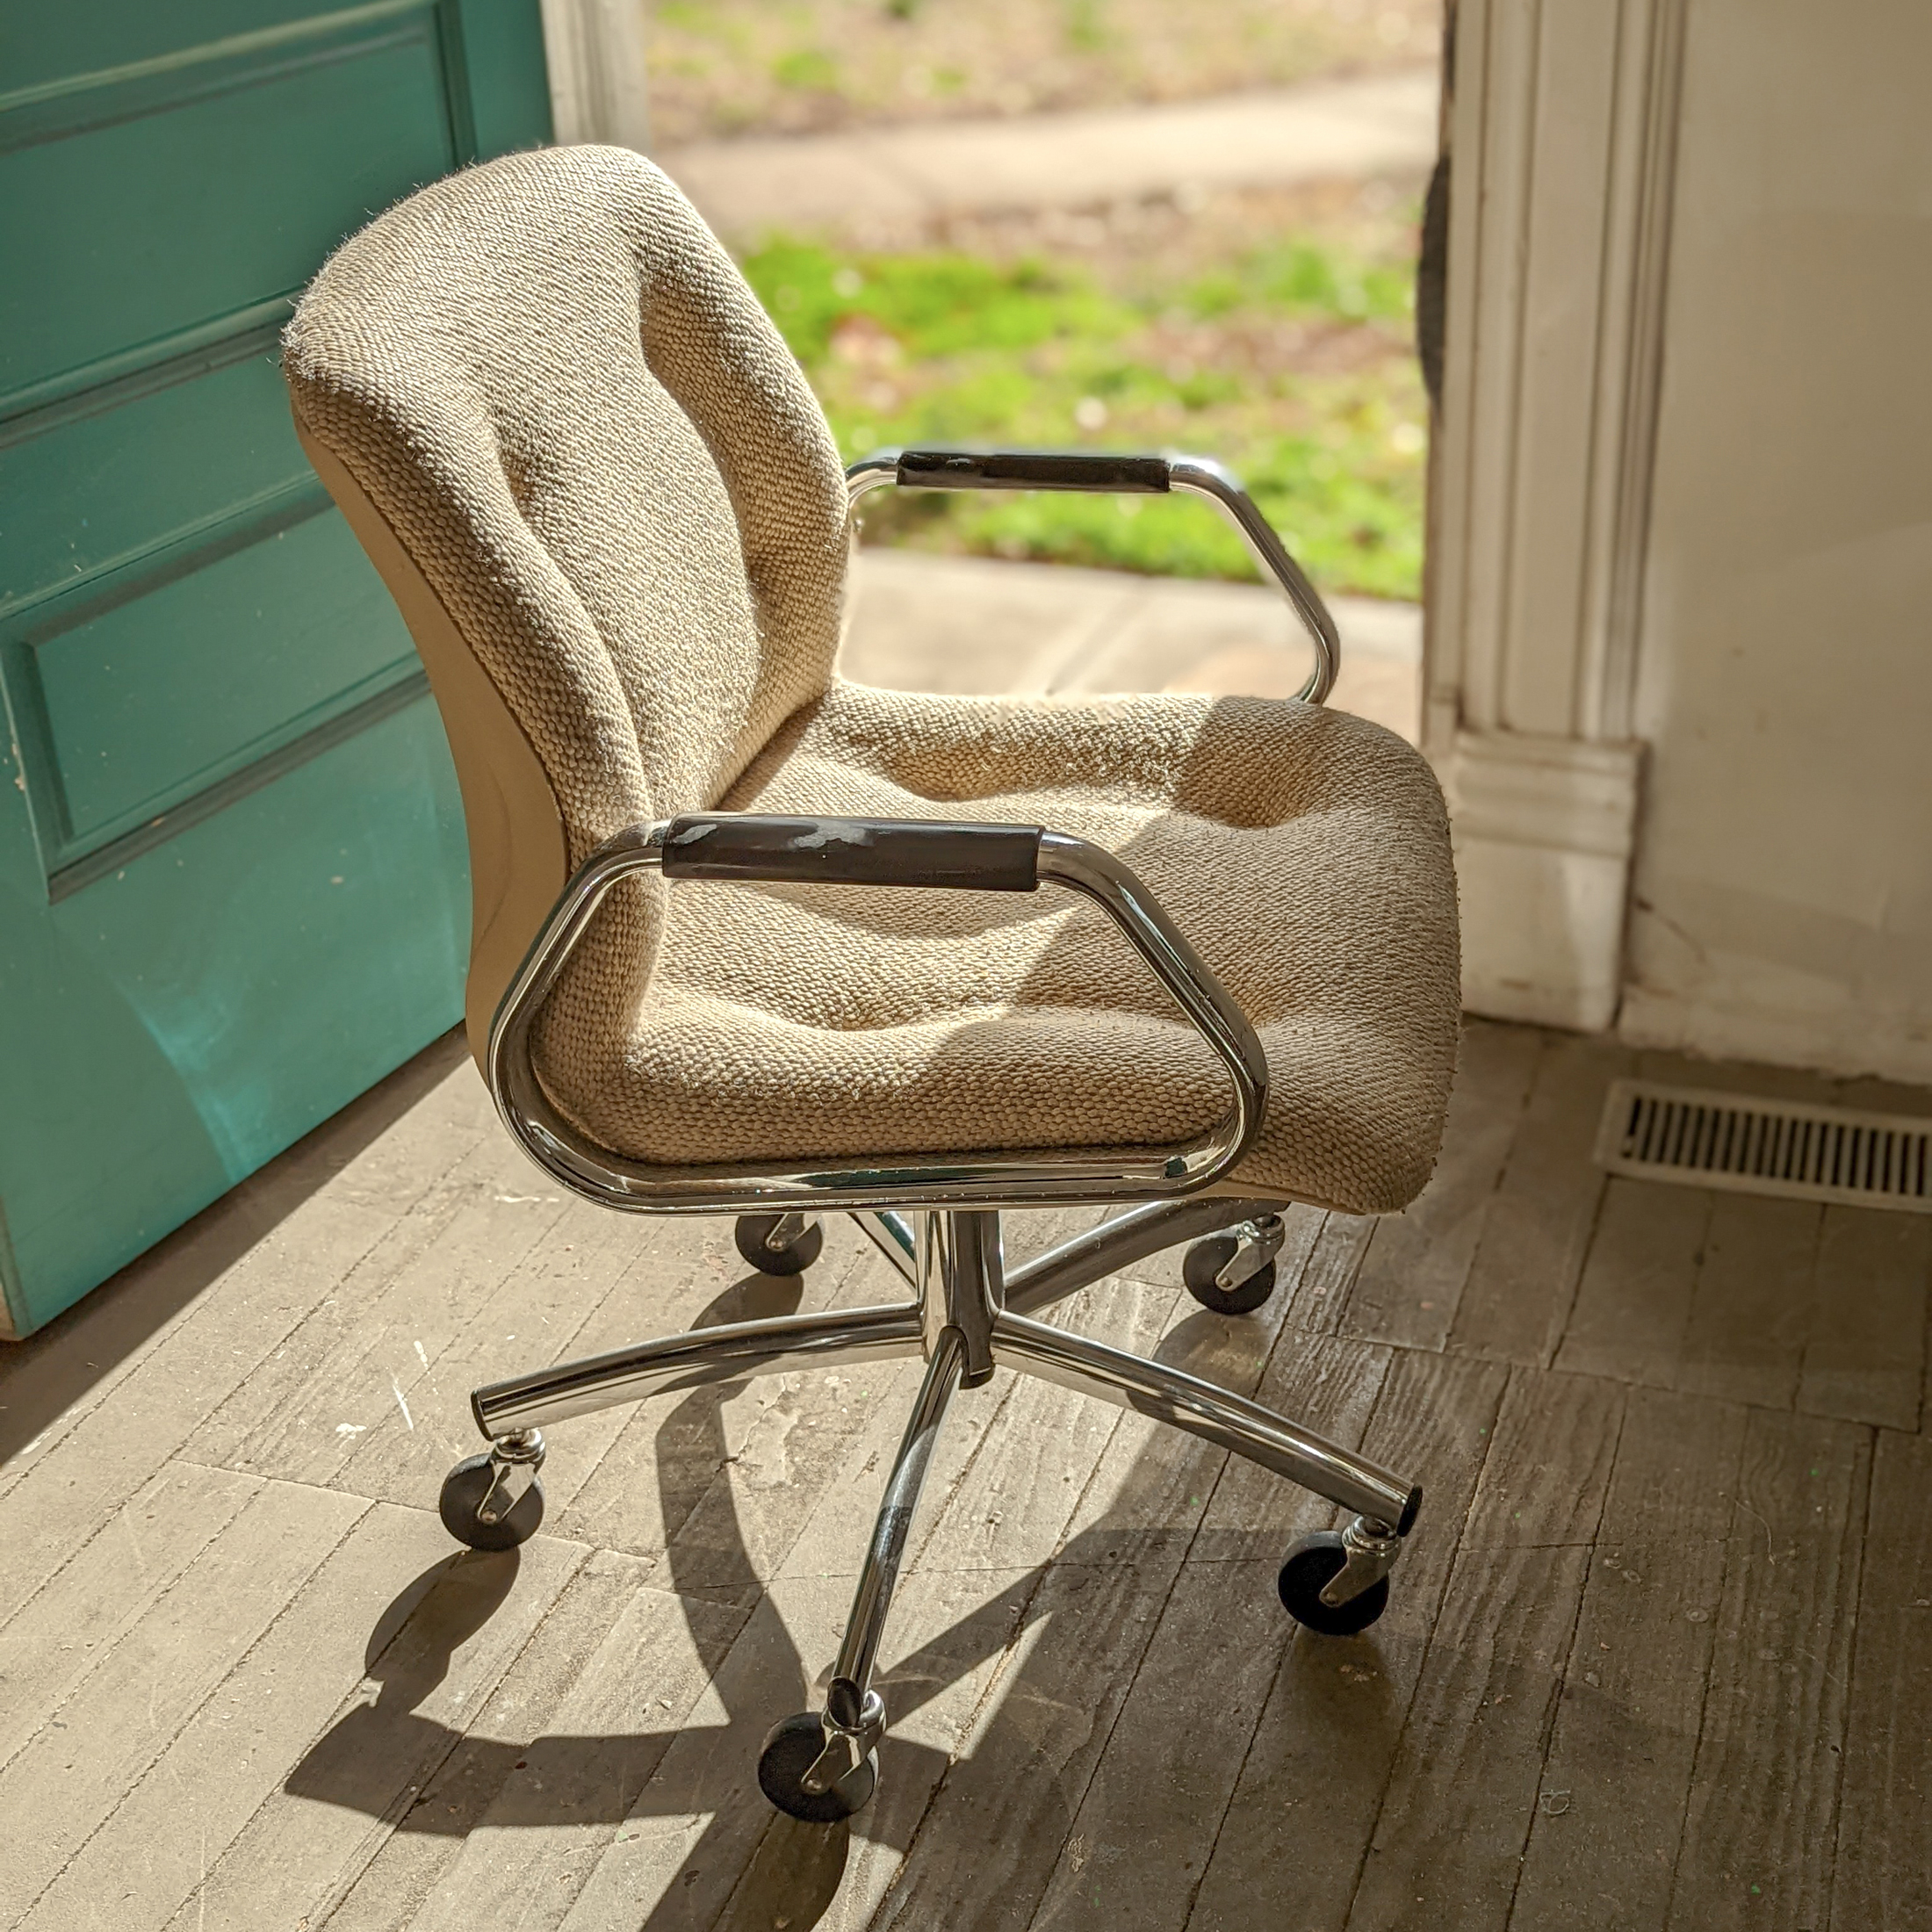 A vintage midcentury modern desk chair made by Steelcase office chairs.